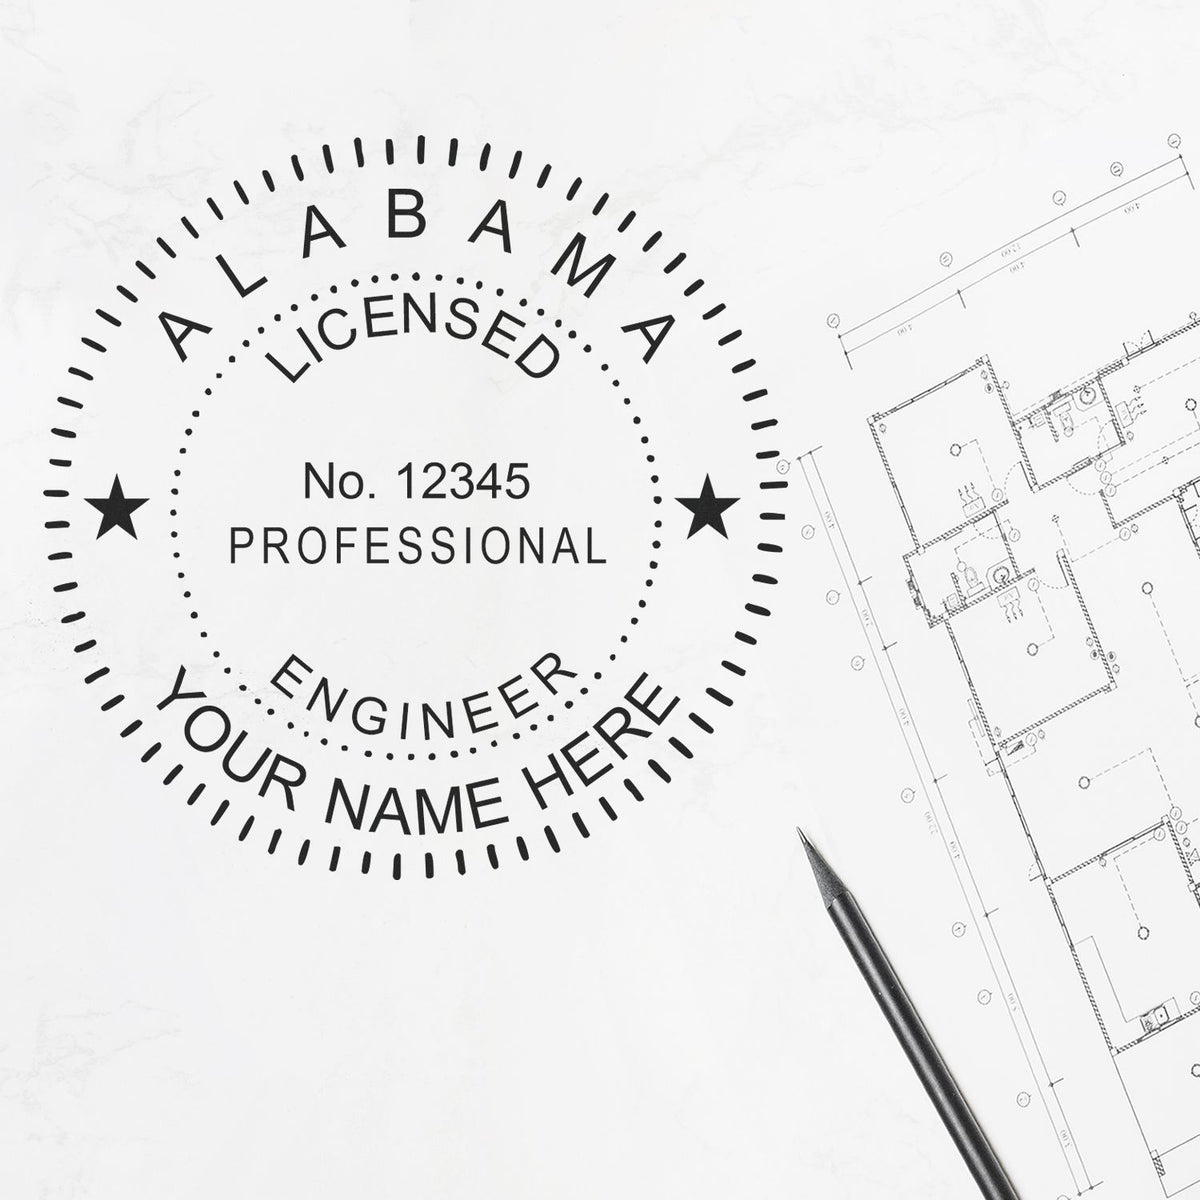 A lifestyle photo showing a stamped image of the Alabama Professional Engineer Seal Stamp on a piece of paper